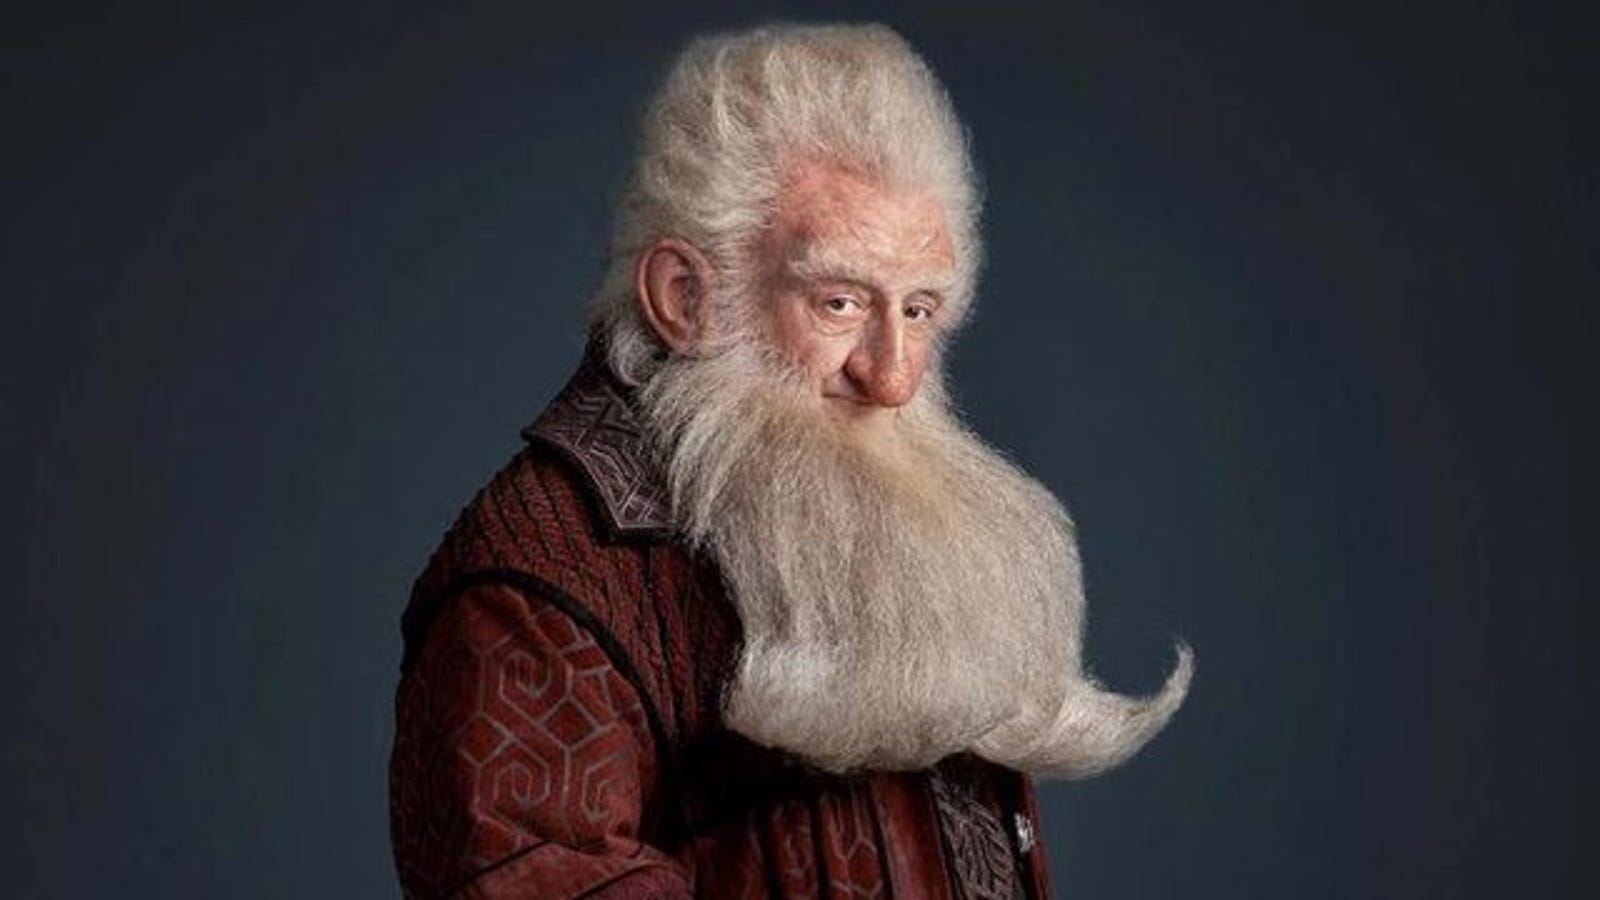 Hobbit Headshots Show Off The Many Braided Beards Of Middle Earths Dwarves 